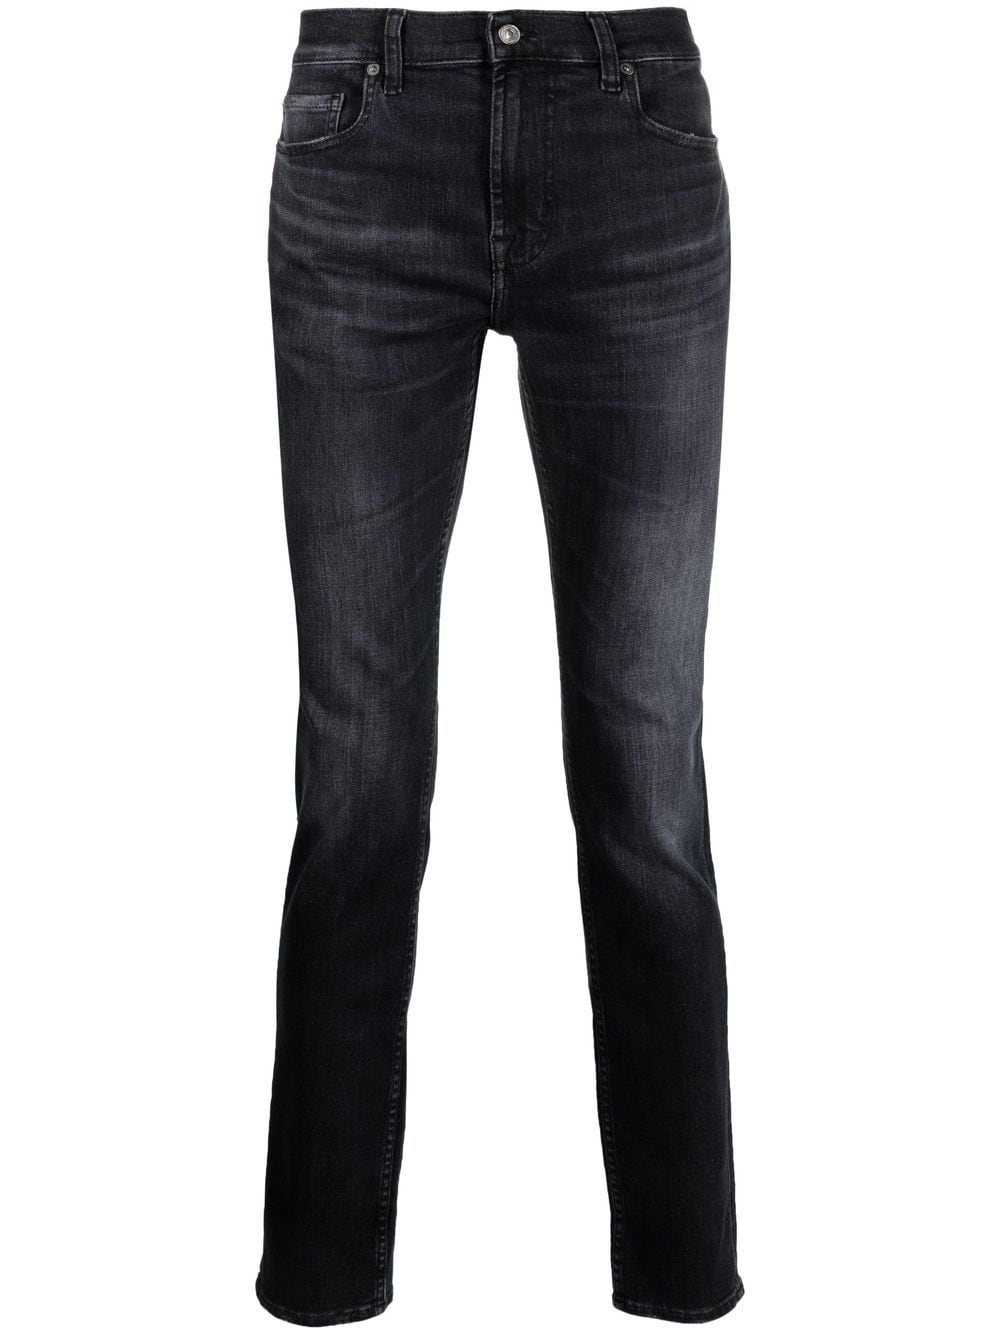 7 for all mankind paxytyn slim-fit jeans - black